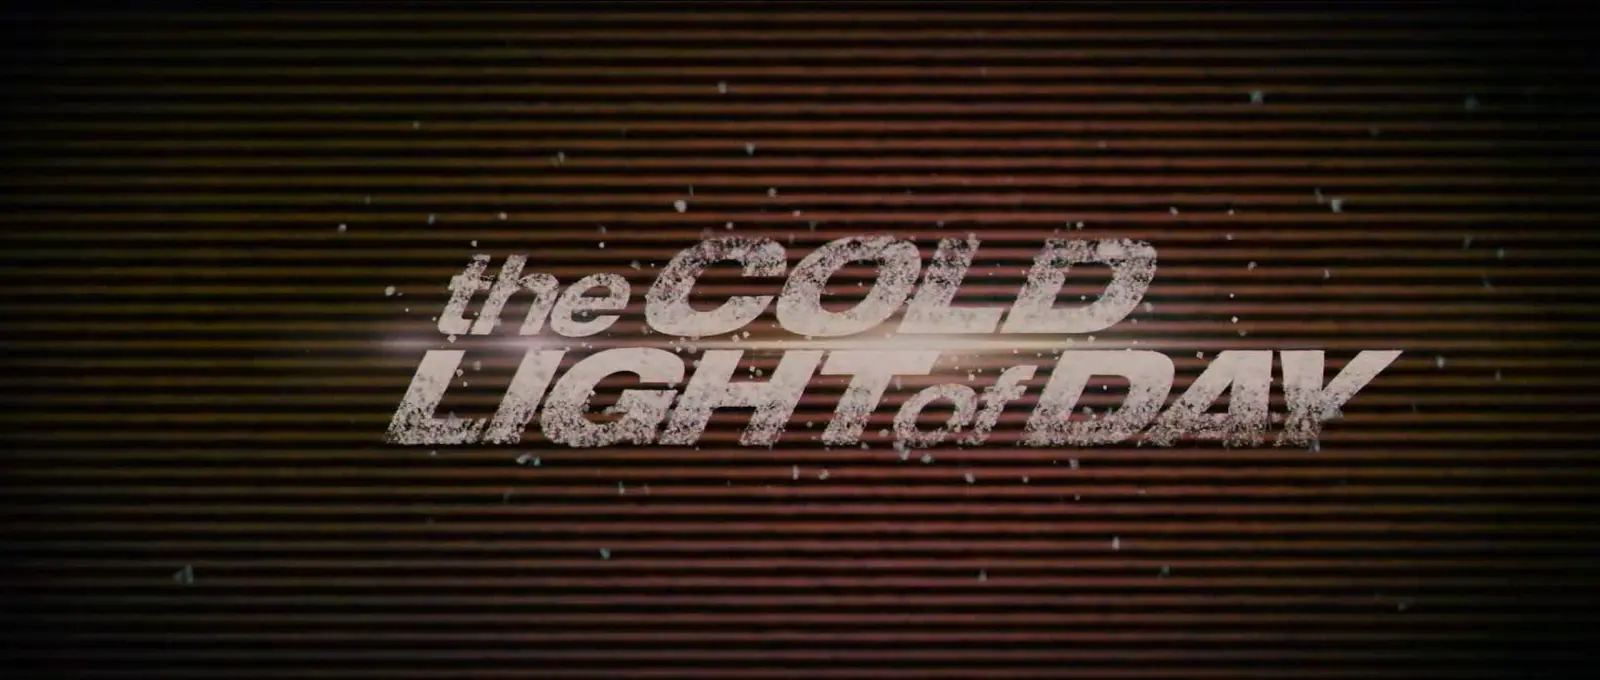 Movie The Cold Light of Day wallpaper 2 | Background Image